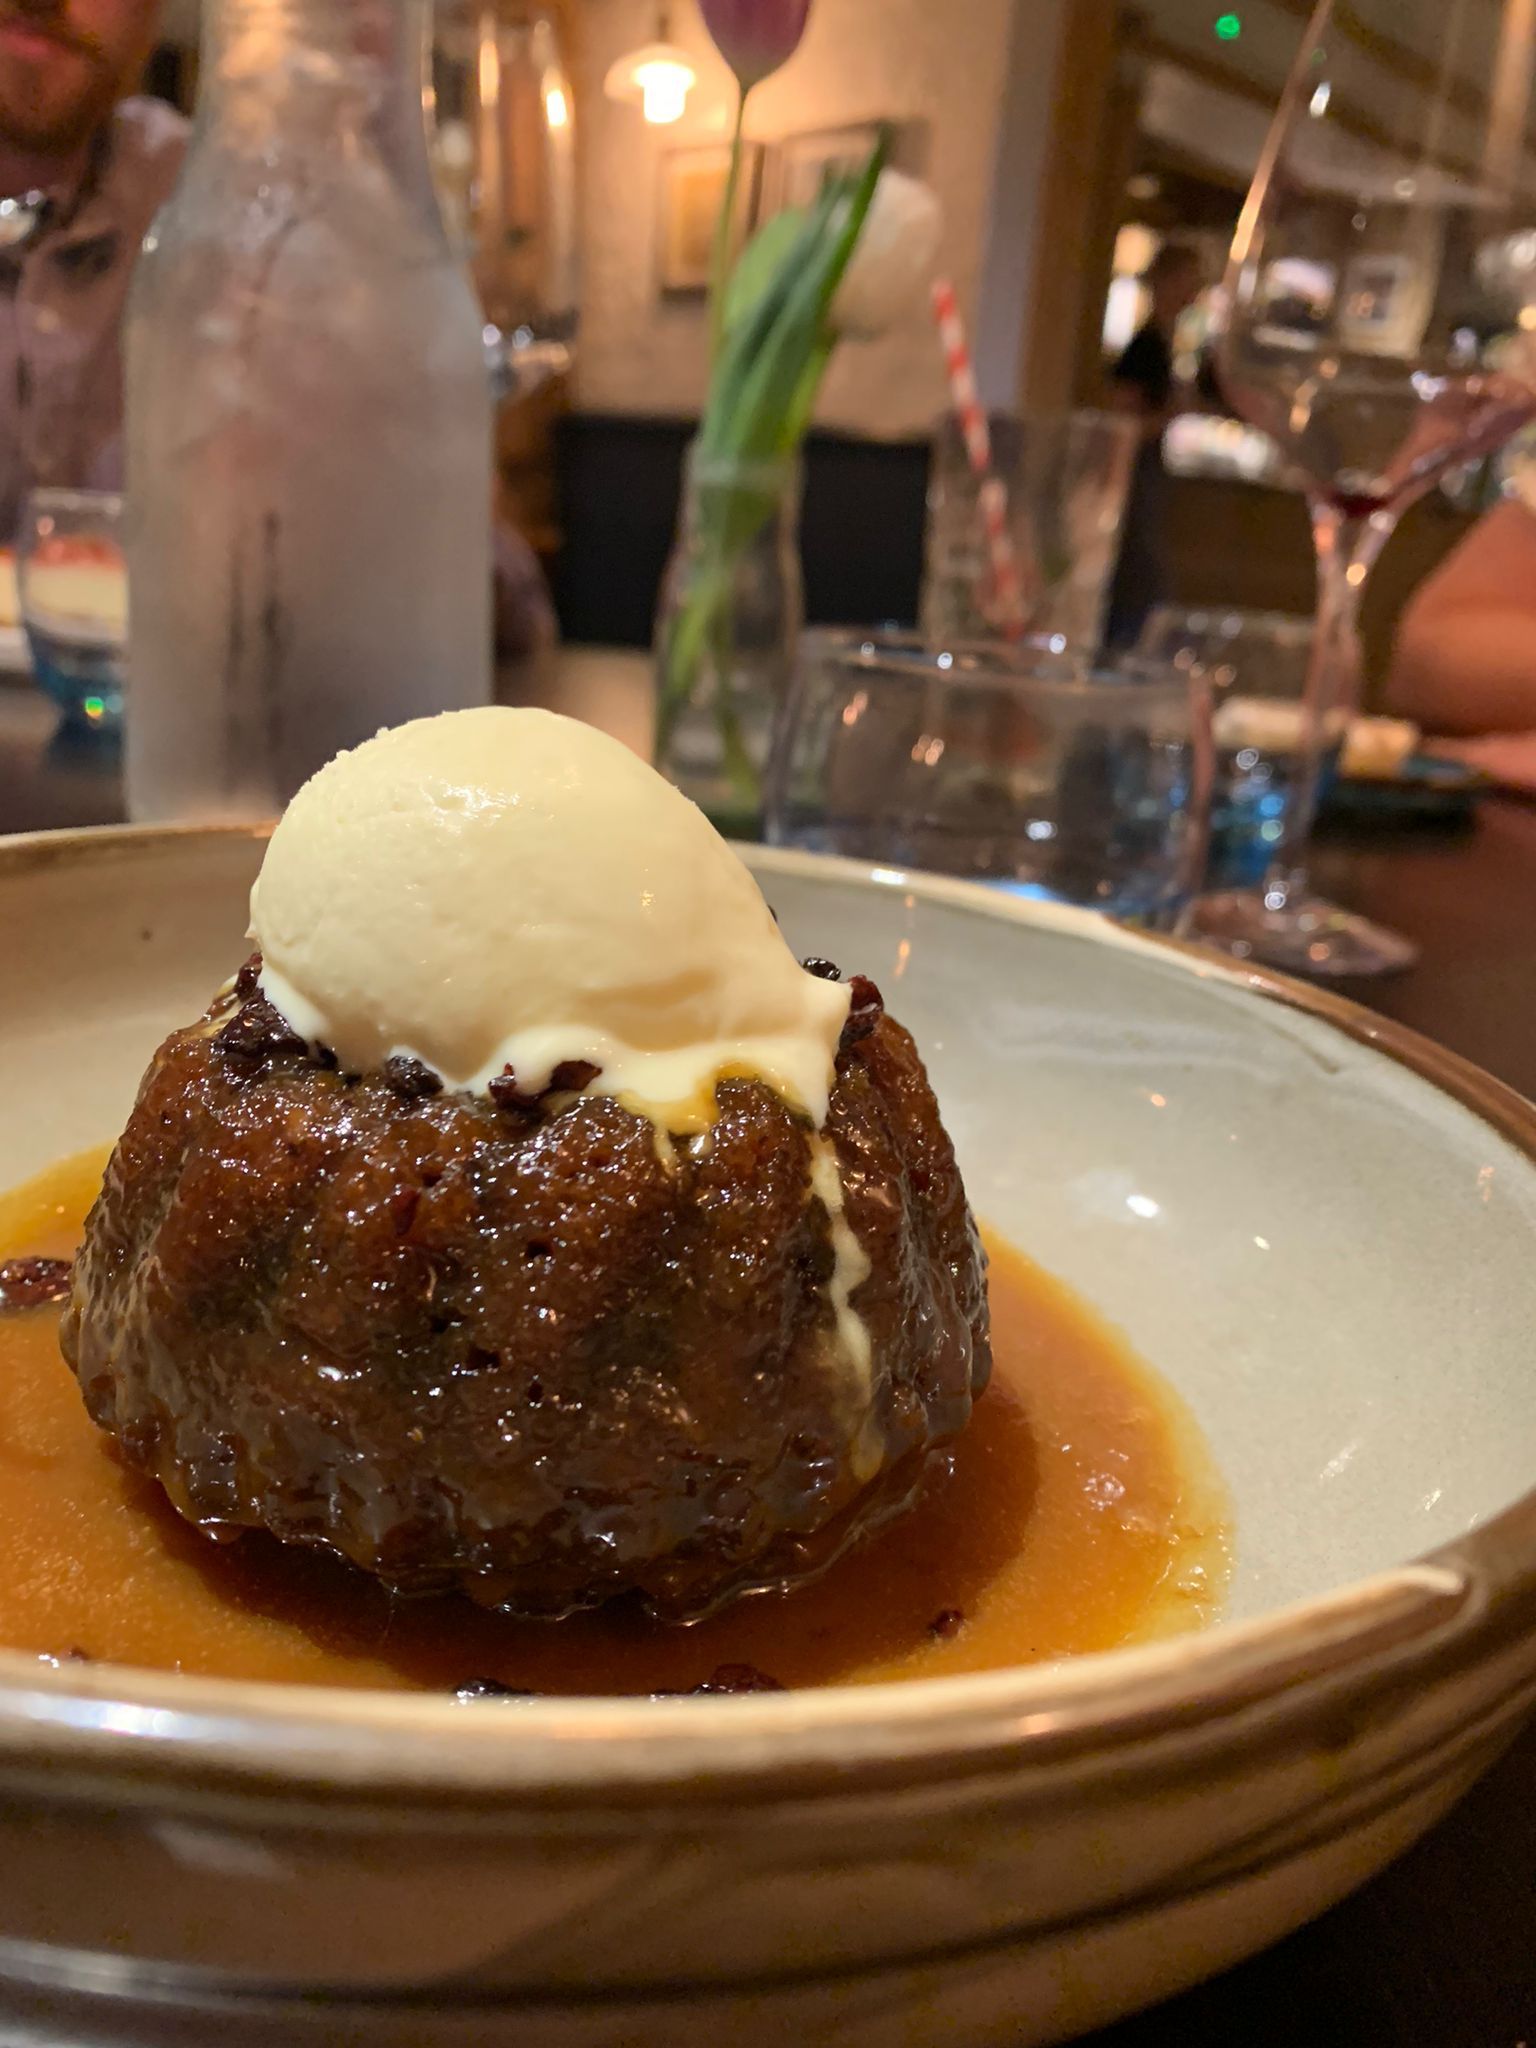 The sticky toffee pudding